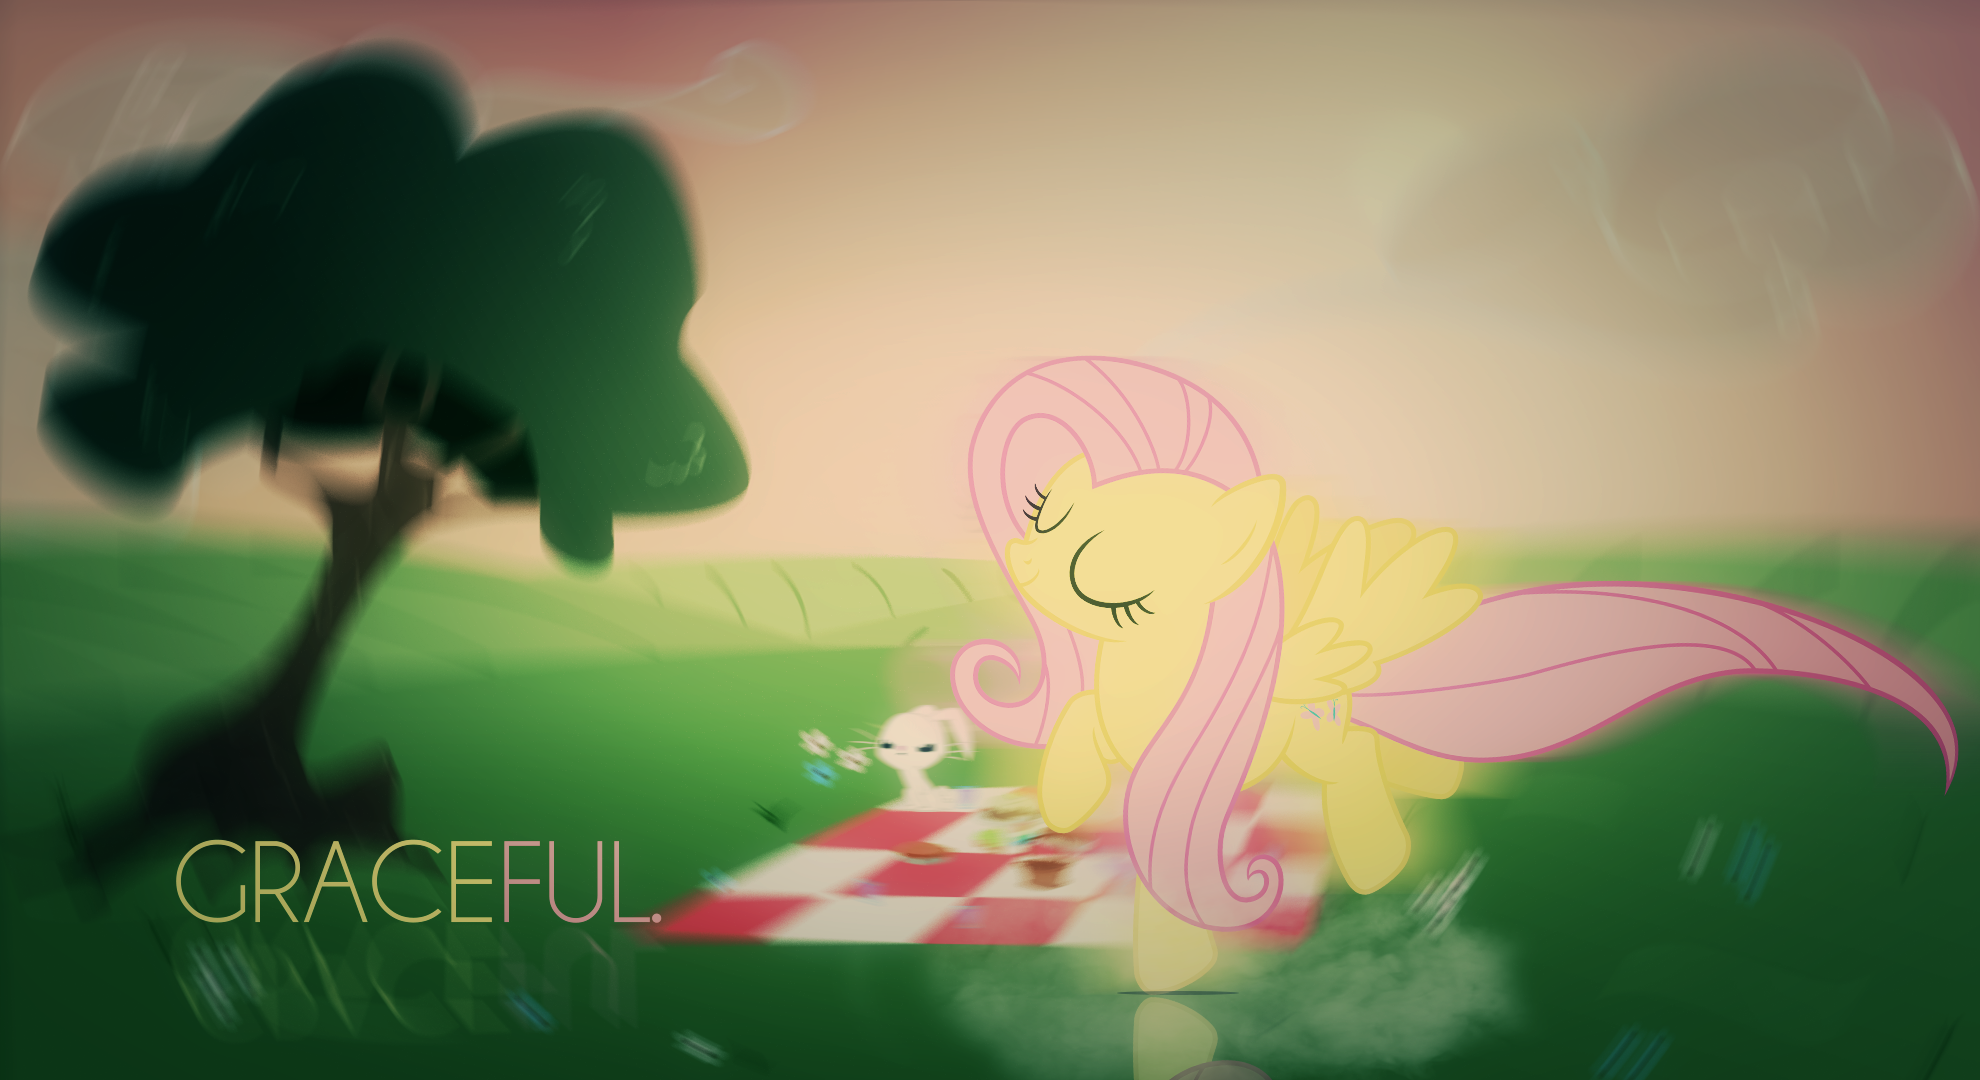 Graceful. by BronyGFX